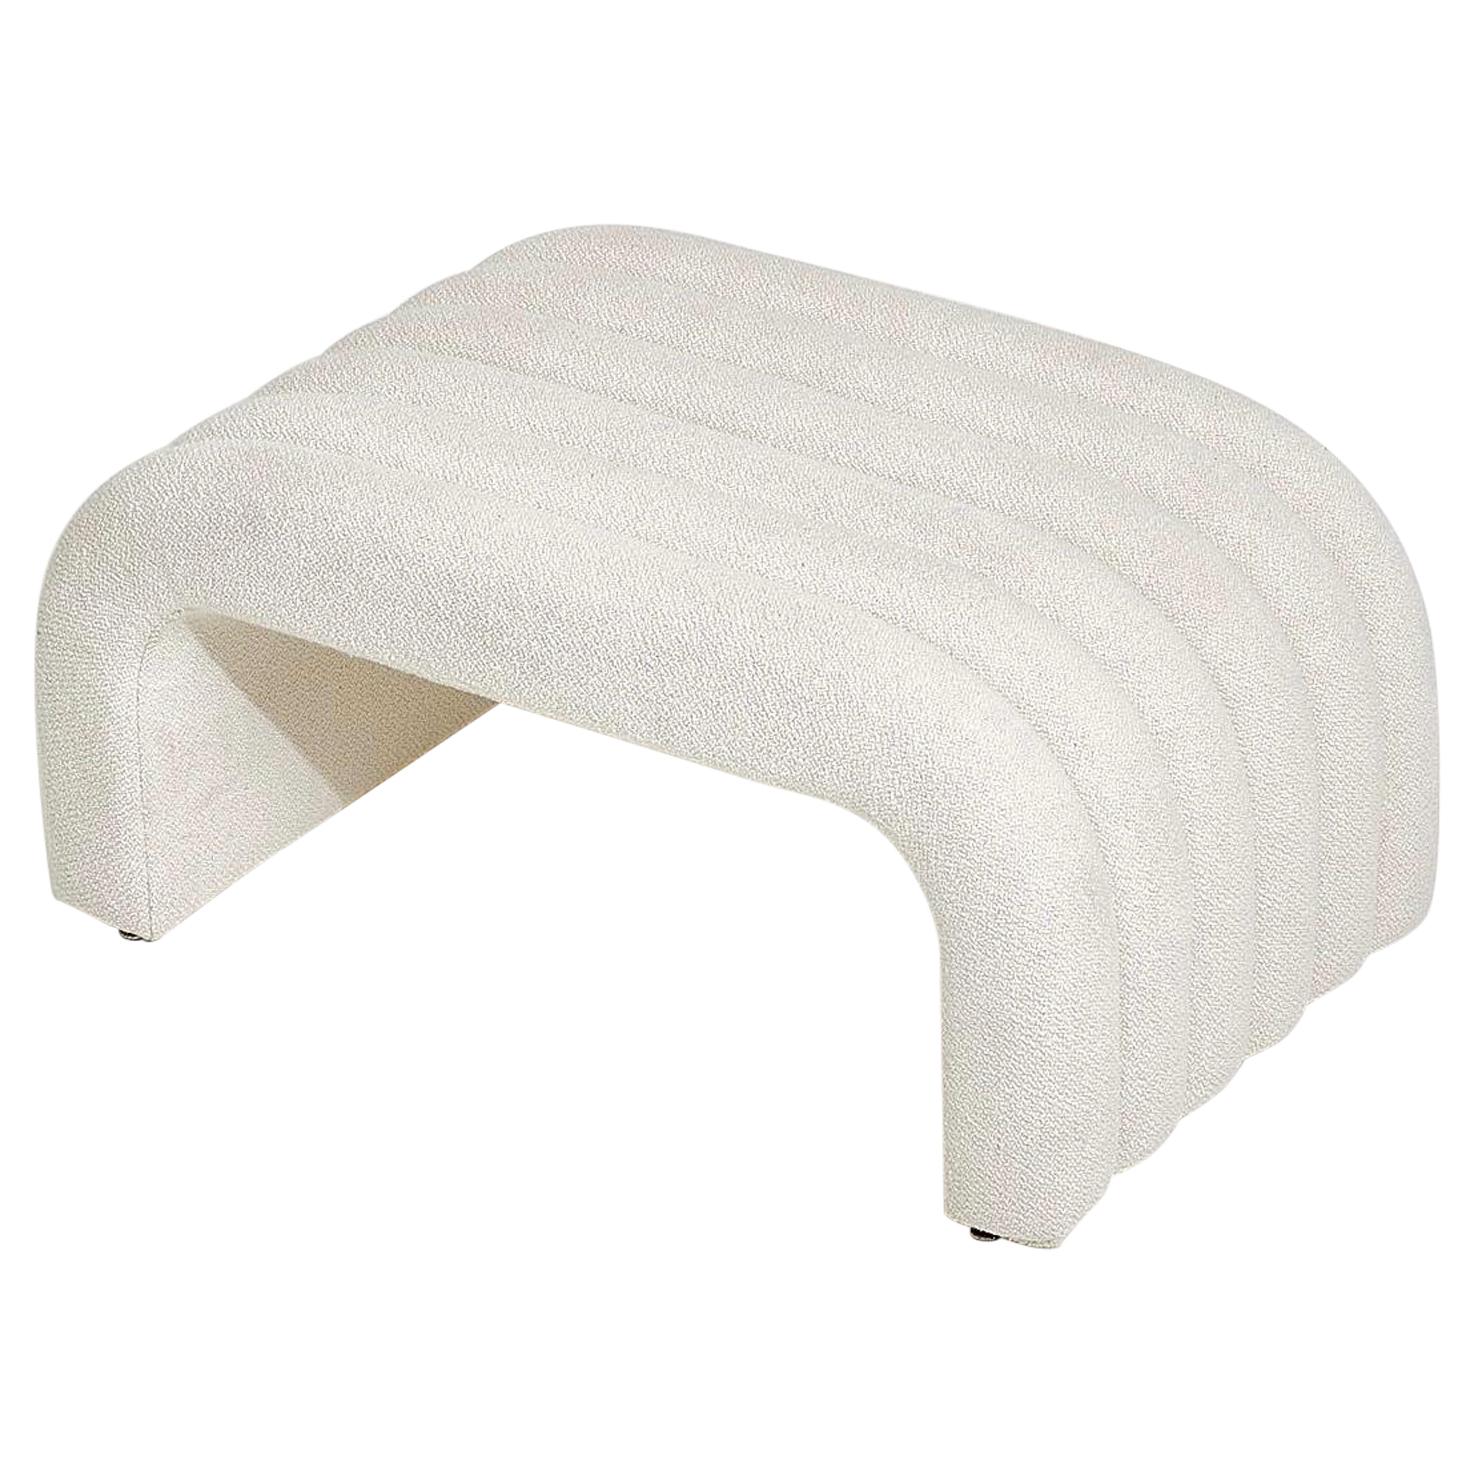 Steve Chase Channeled Waterfall Bench in White Boucle